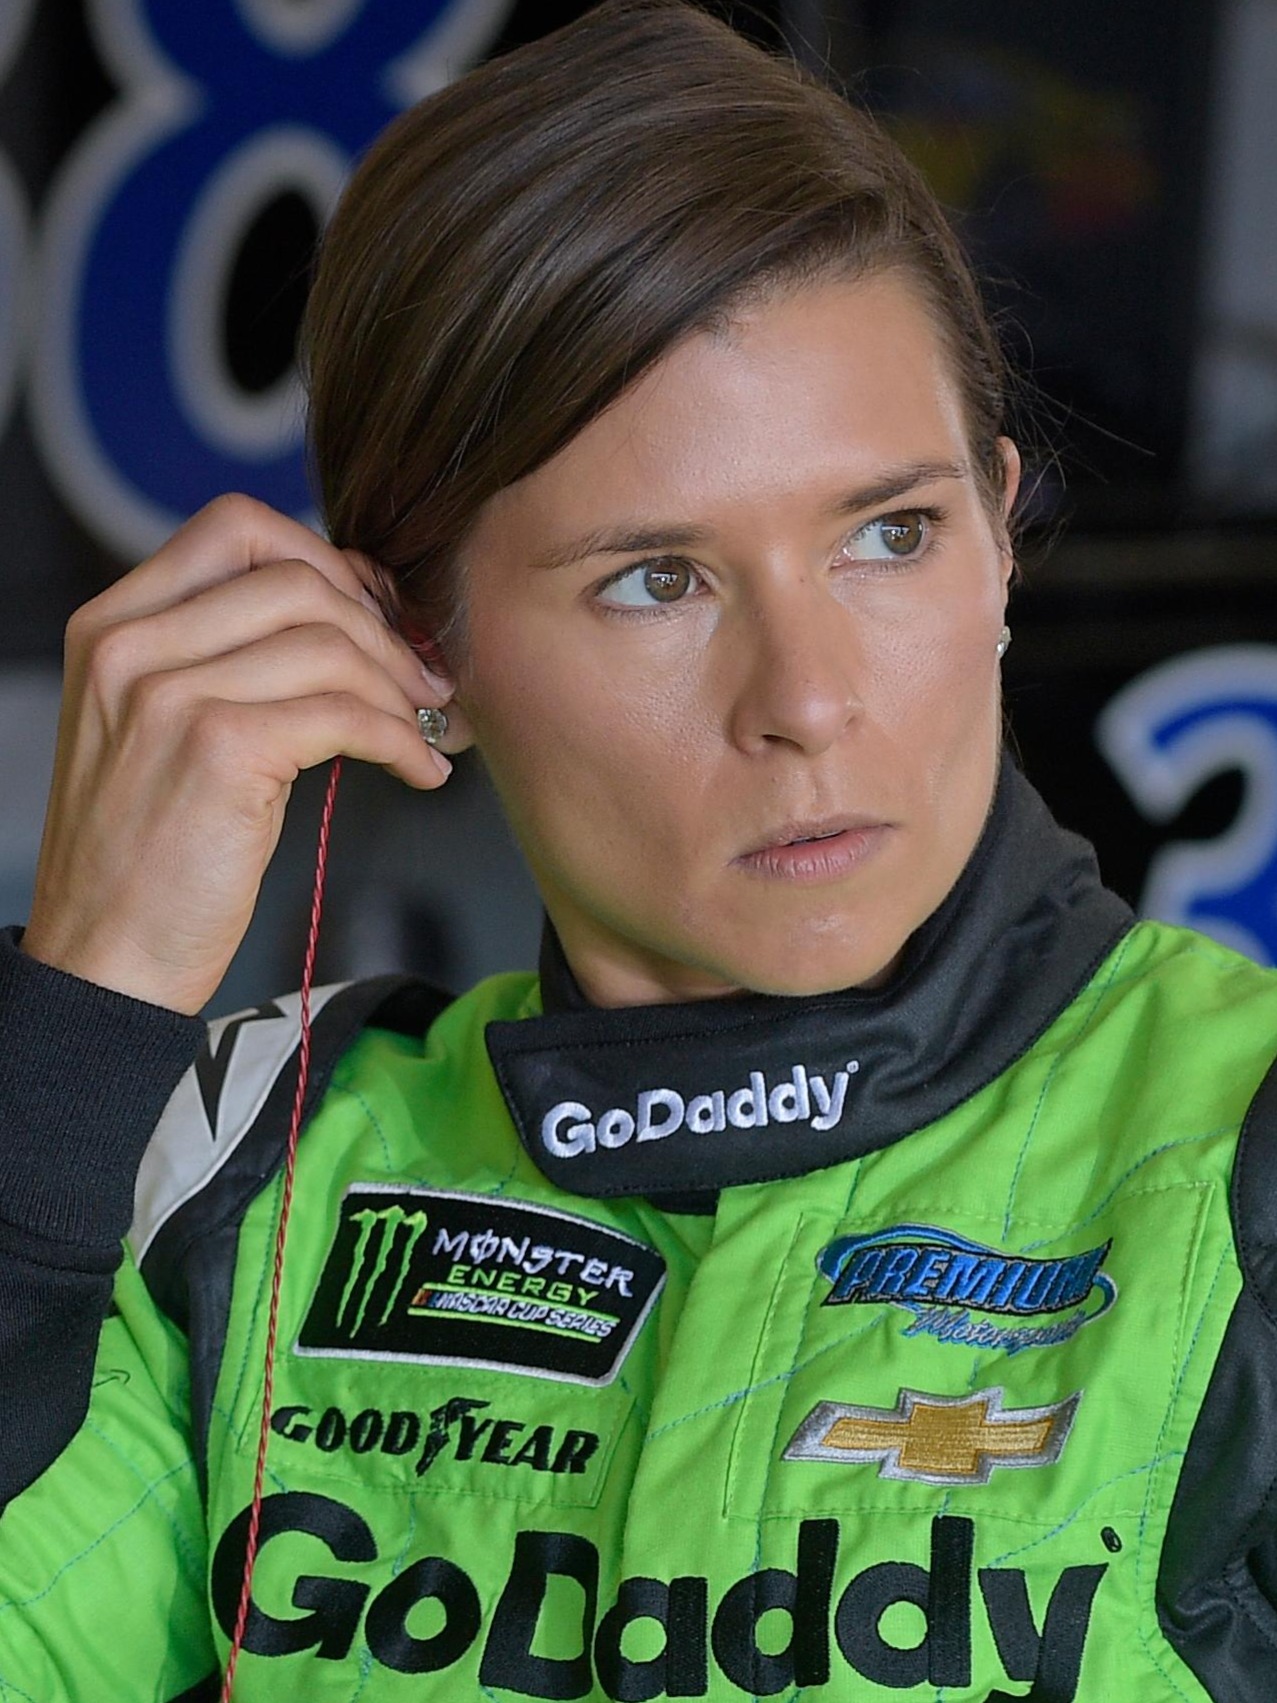 How many podium finishes did Danica Patrick achieve in her IndyCar Series career?